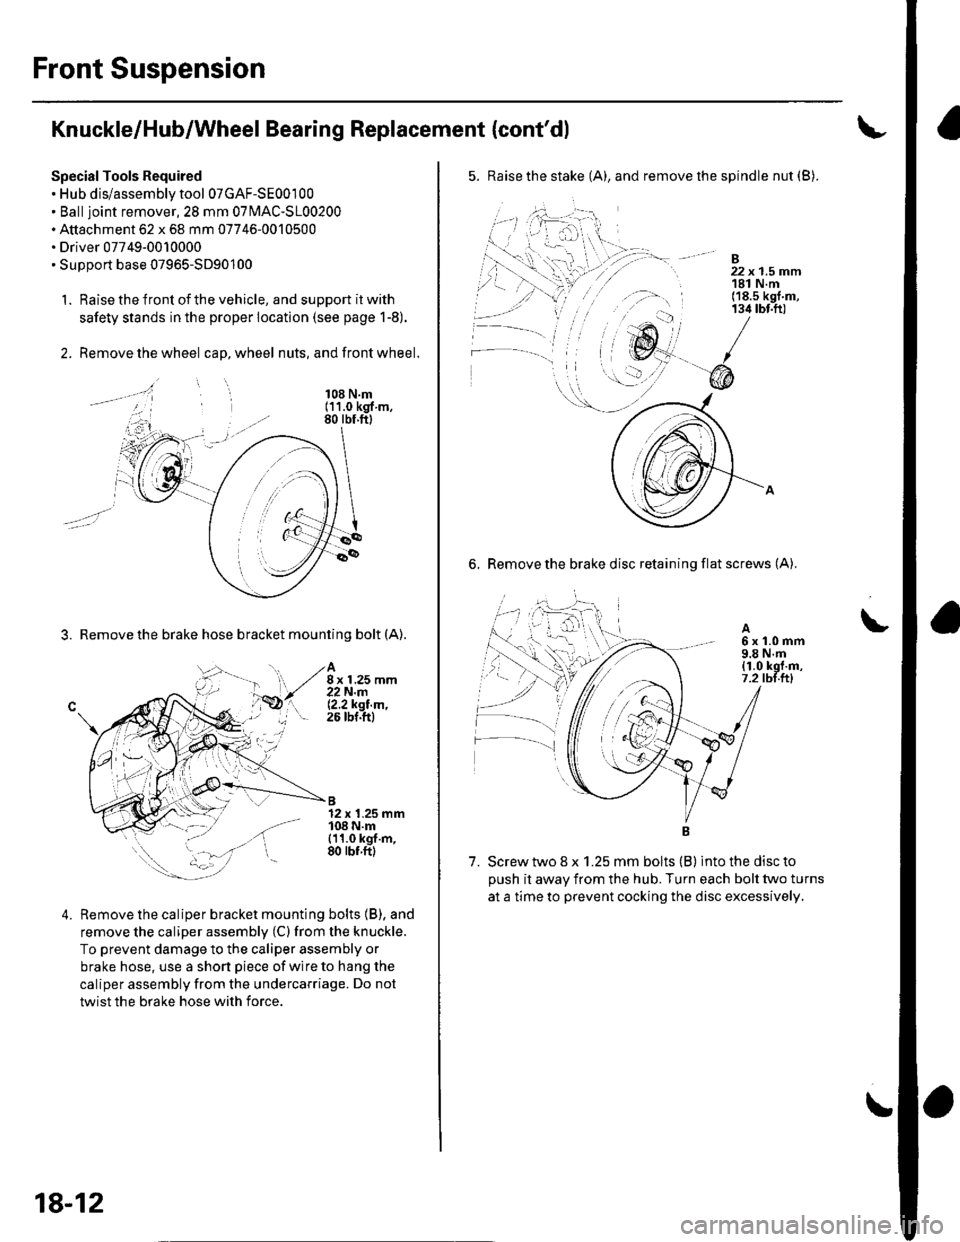 HONDA CIVIC 2002 7.G Service Manual Front Suspension
Knuckle/Hub/Wheel Bearing Replacement {contdl
Special Tools Required. Hub dis/assembly tool 07GAF-SE00100. Balljoint remover,2S mm 0TlvlAC-S100200. Attachment 62 x 68 mm 07746-001050